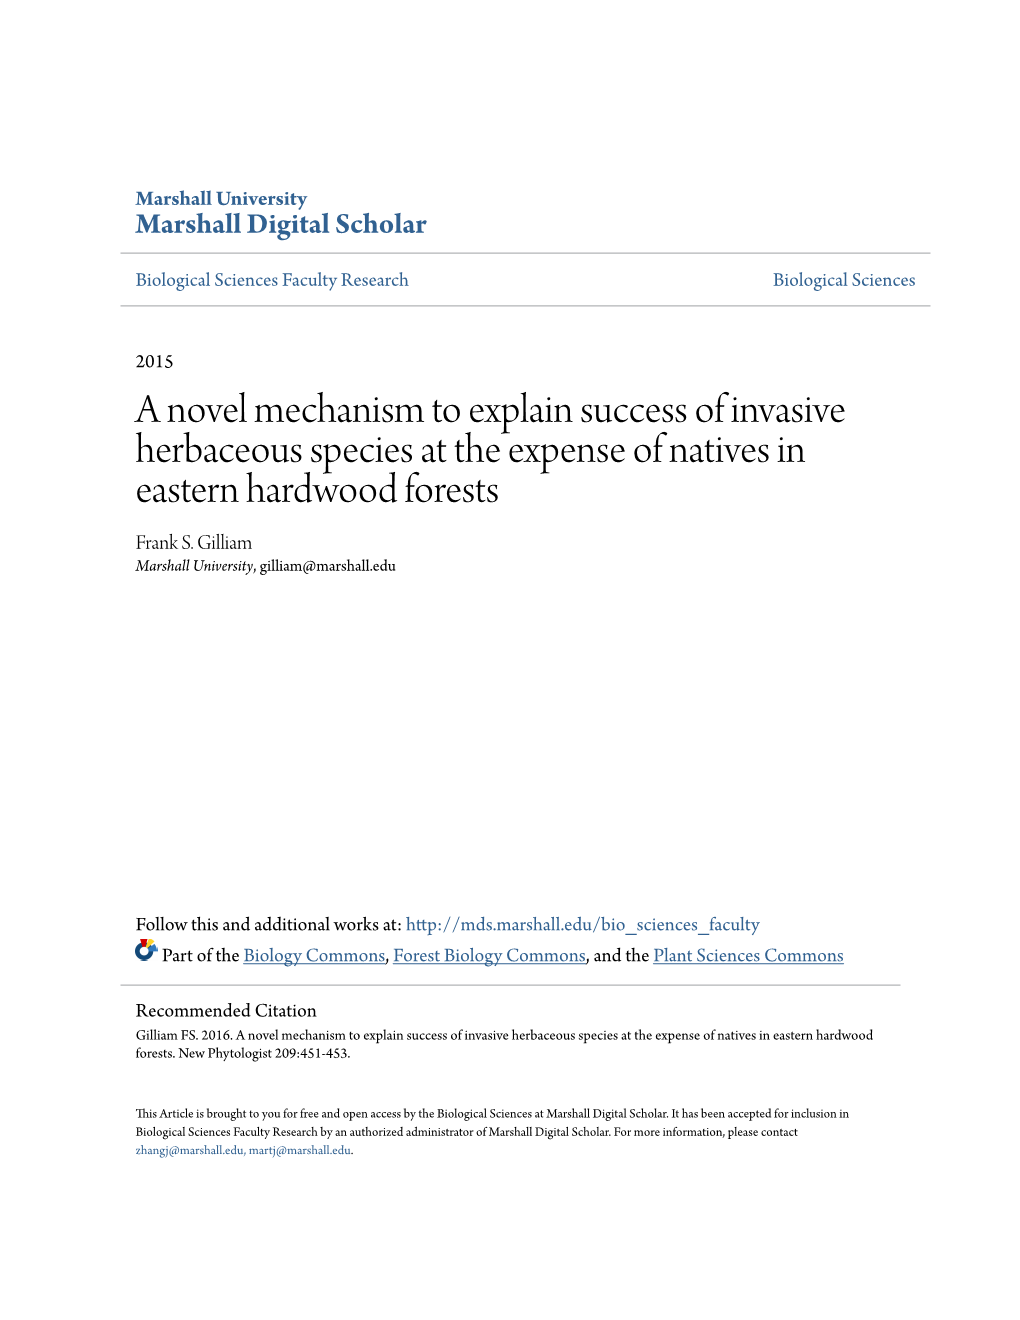 A Novel Mechanism to Explain Success of Invasive Herbaceous Species at the Expense of Natives in Eastern Hardwood Forests Frank S